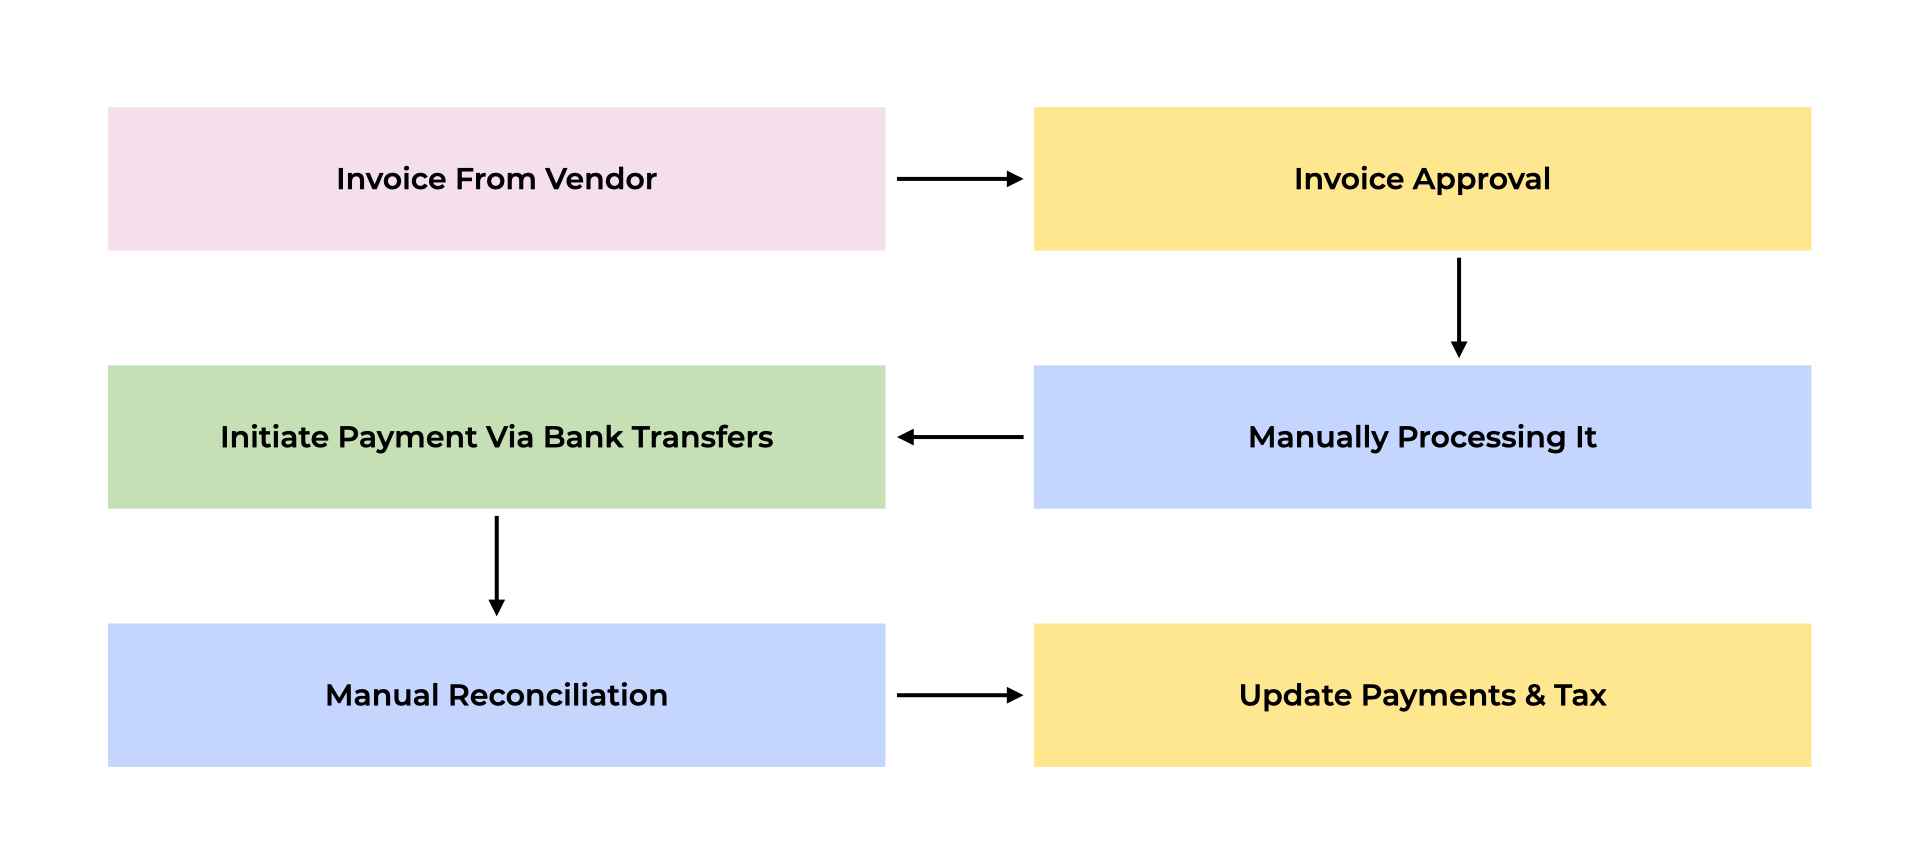 Manually processing vendor payments